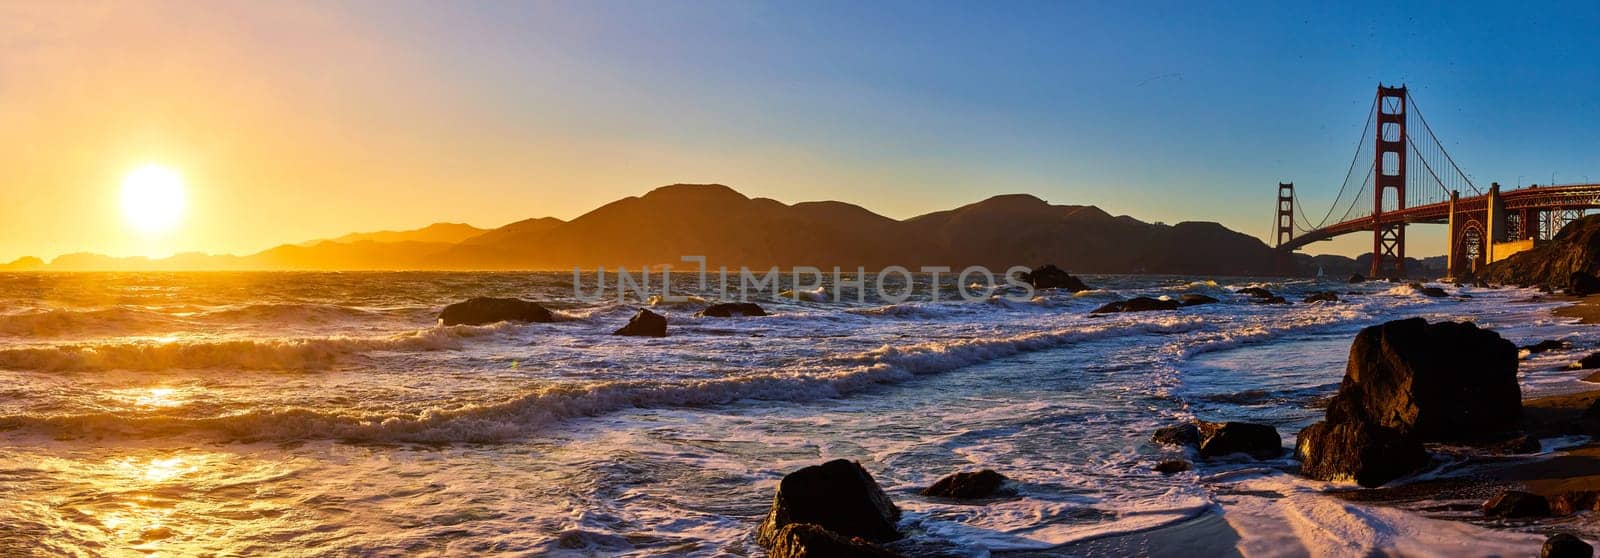 Panorama sunset over waves and distant mountain with Golden Gate Bridge by njproductions